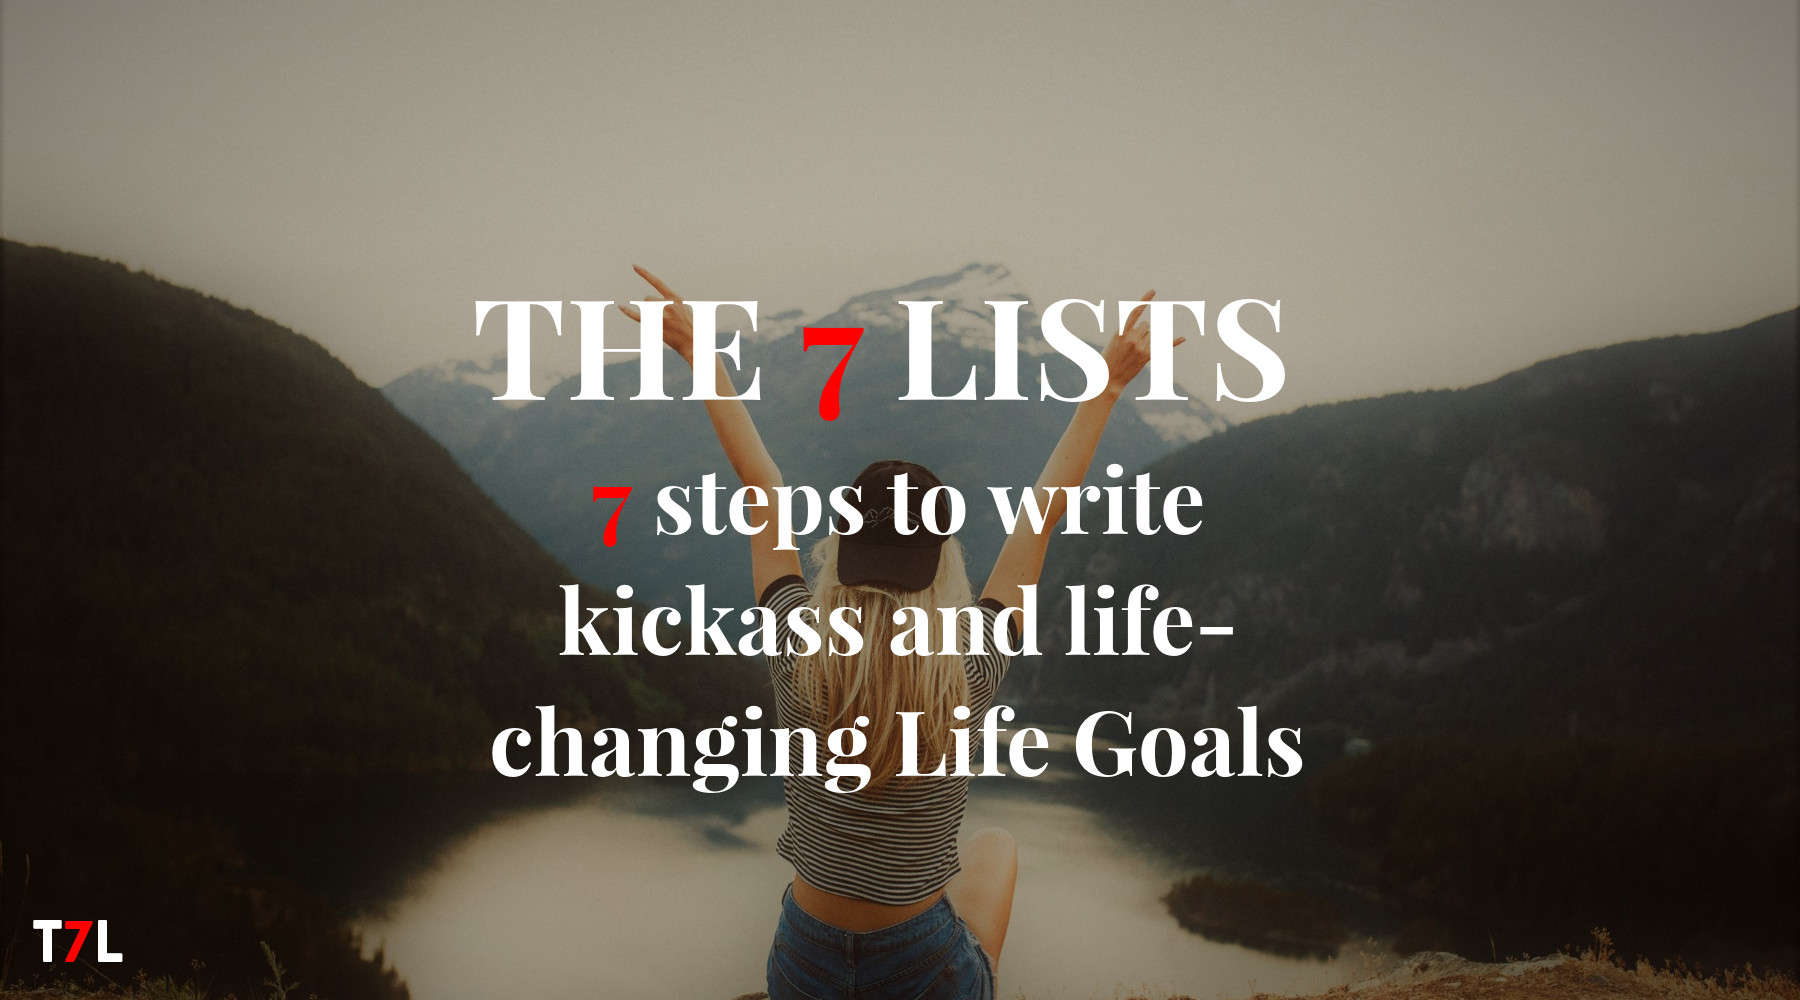 T7L_7 steps to writing life goals